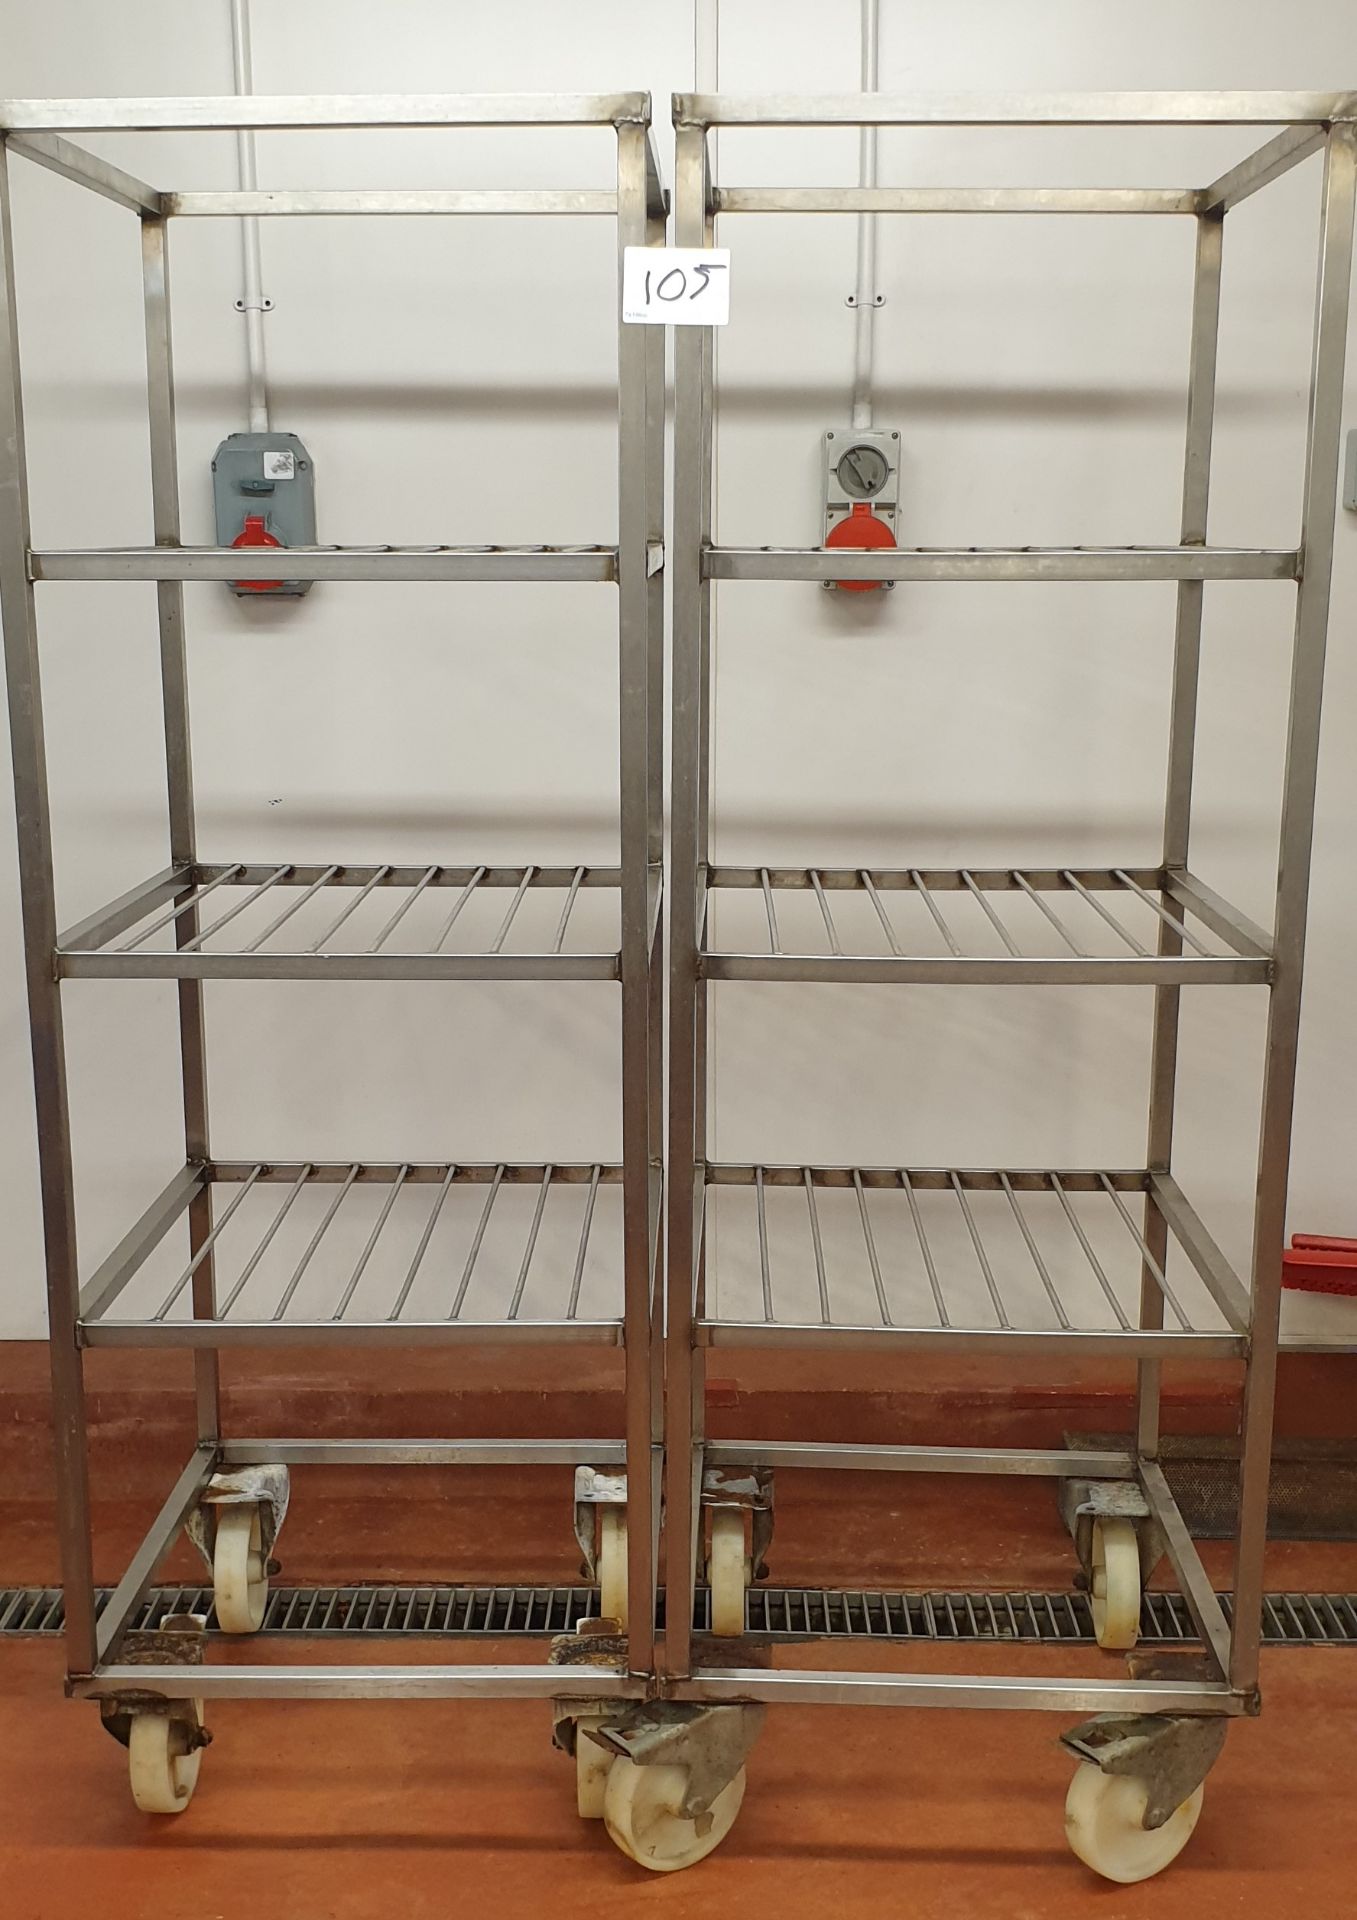 2 x Stainless Steel 3-Tier Mobile Racking, 0.60m(l) x 0.65m(w) x 1.74m(h)